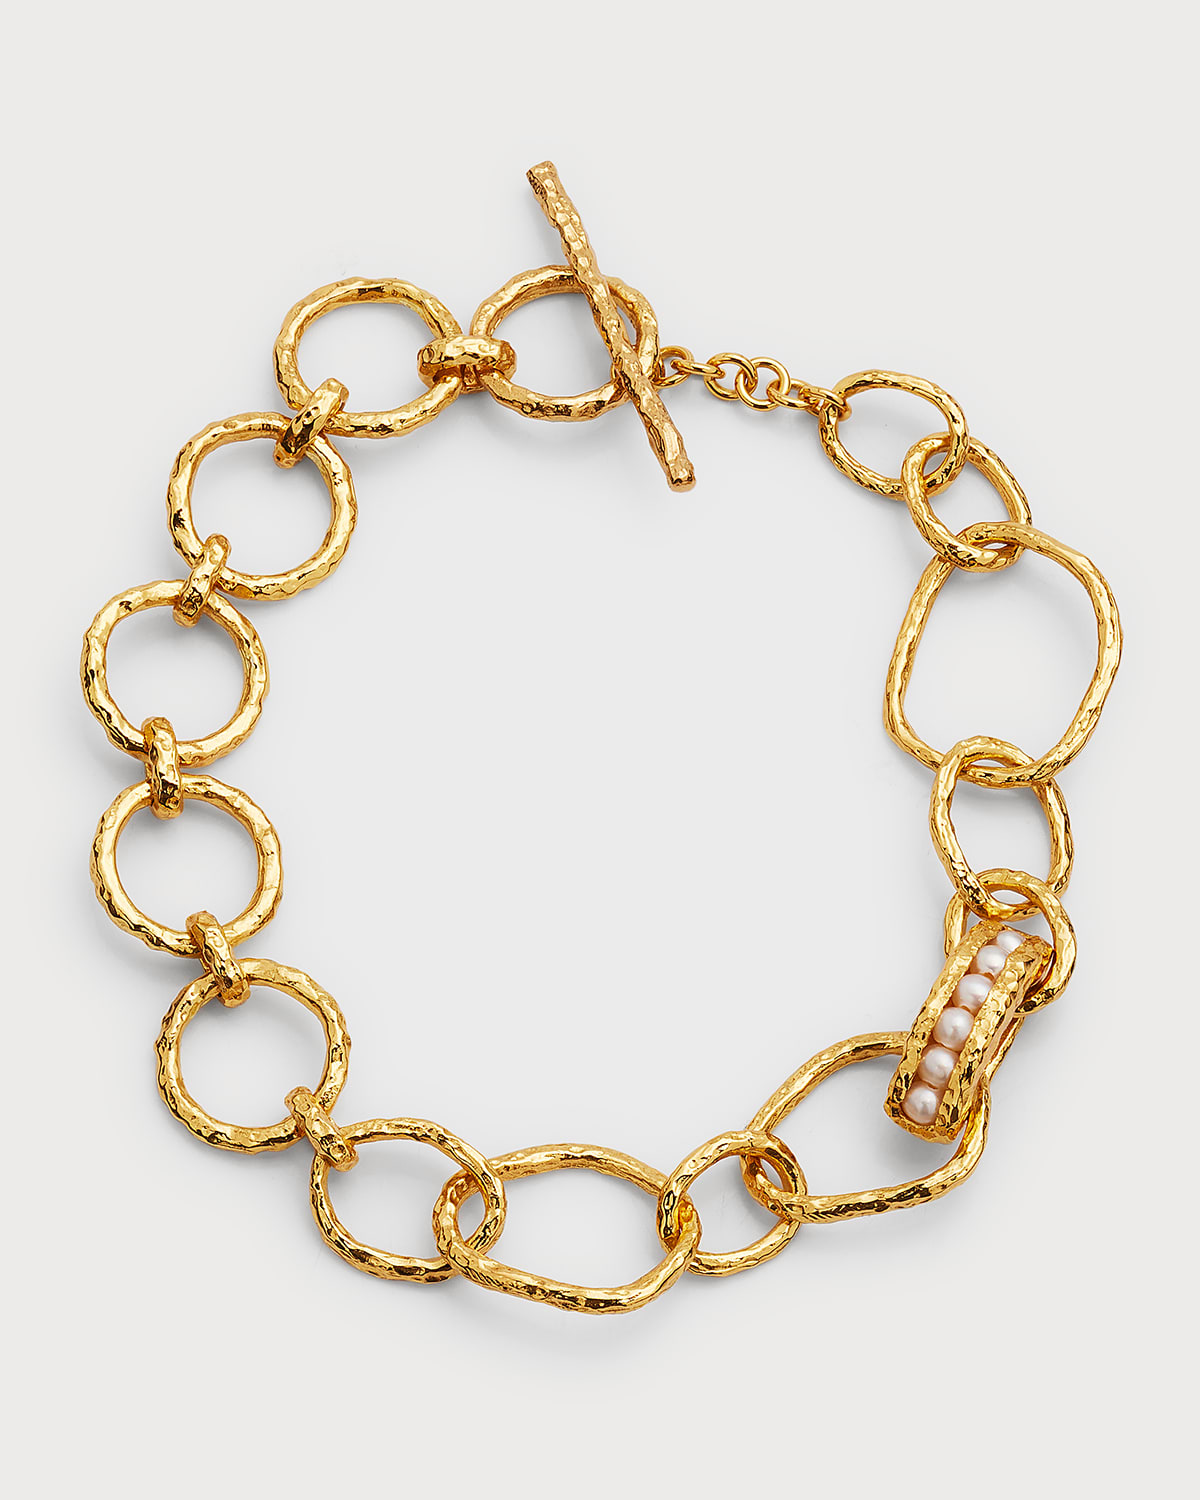 Pacharee Chain Bracelet With Pearls In Gold